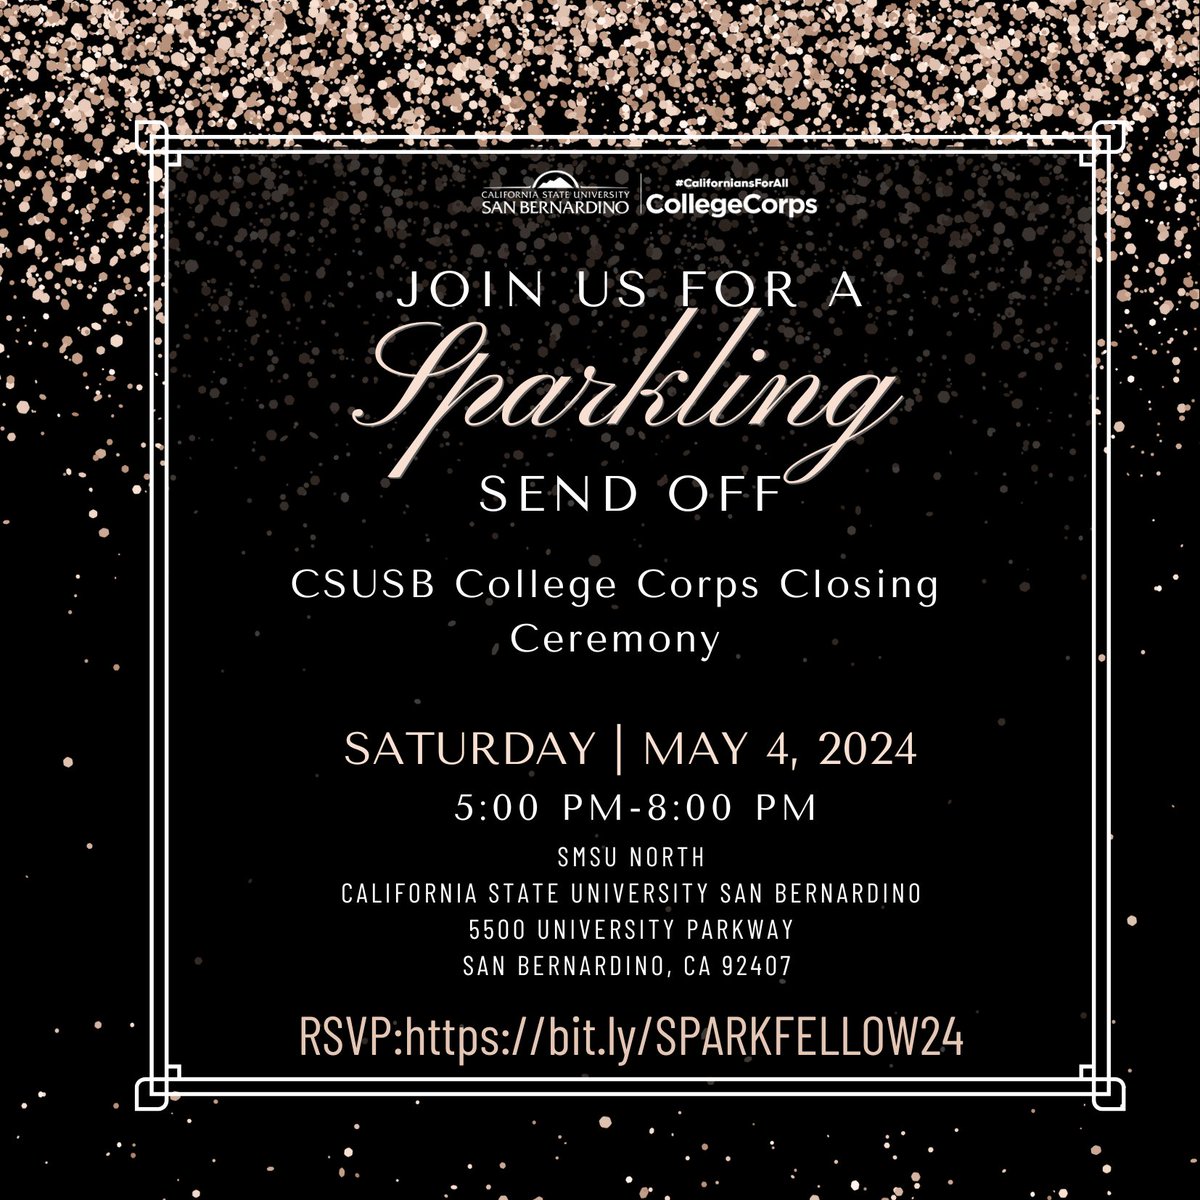 Fellows, it is almost that time to celebrate your accomplishments. The CSU San Bernardino College Corps program is excited to invite you to our College Corps Closing Ceremony, A Sparkling Send Off! T Please RSVP by April 24th. bit.ly/SPARKFELLOW24